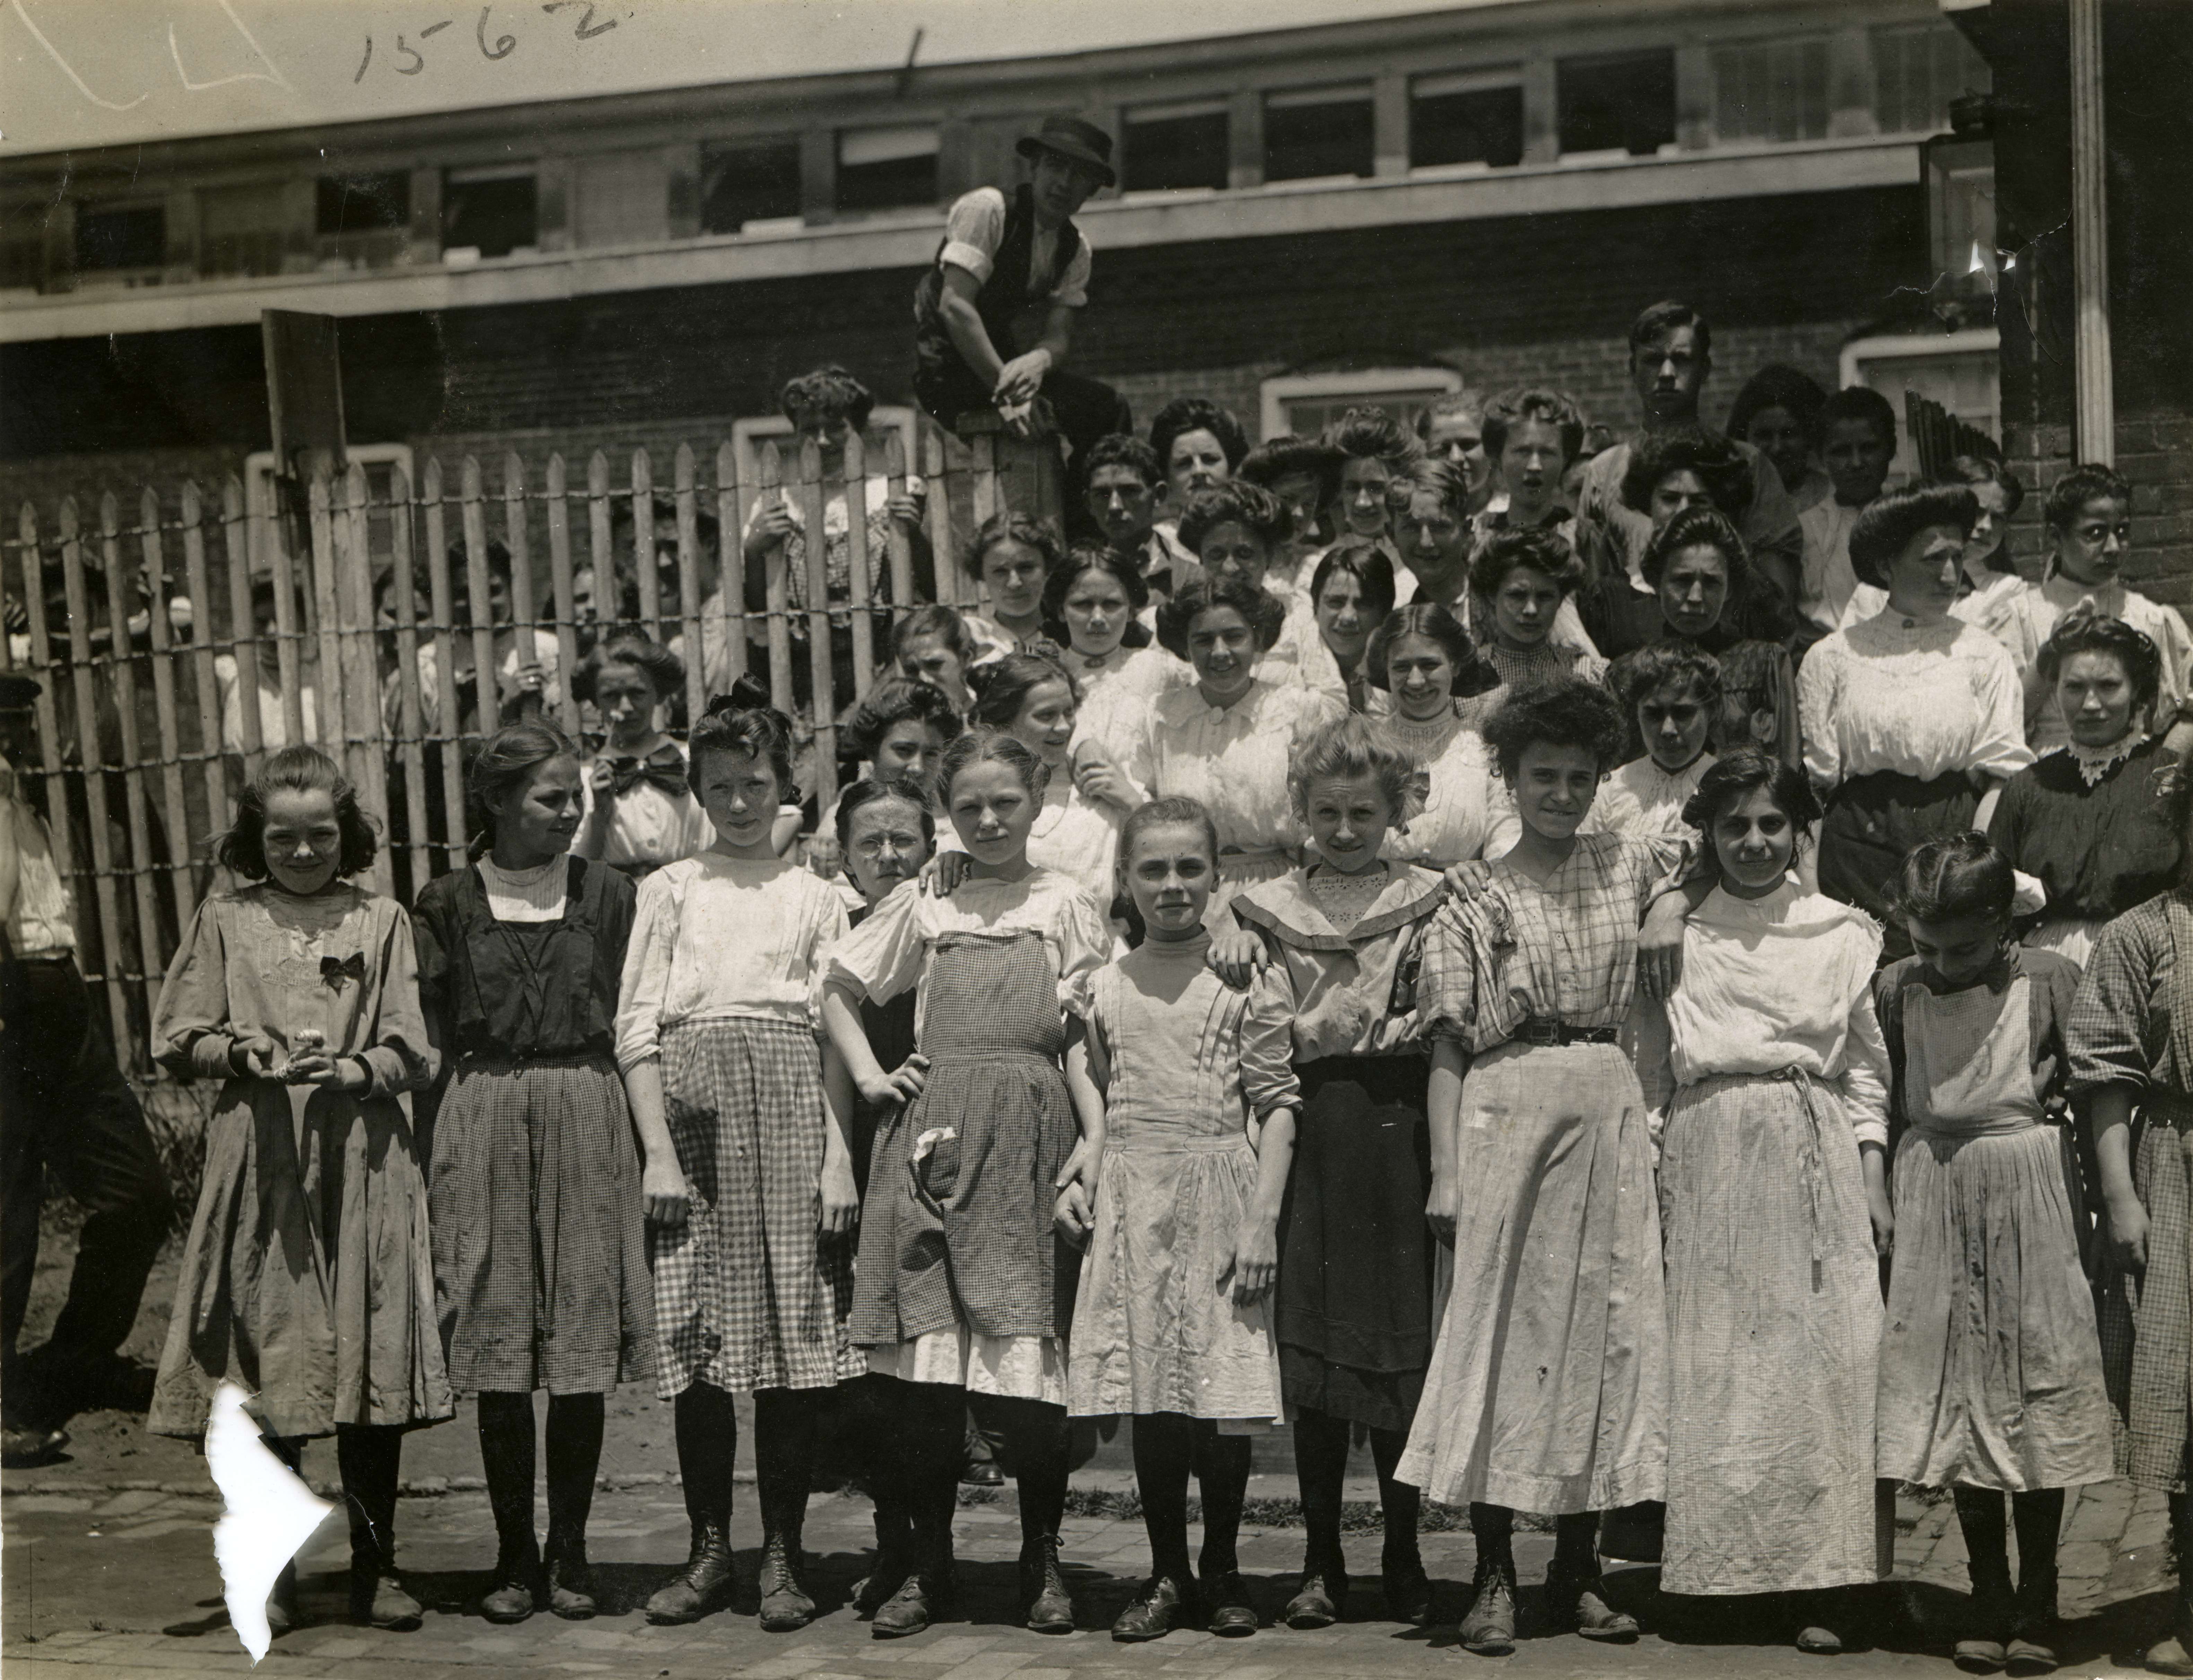 Black and white group photograph of a large number of people, mostly women and young girls.